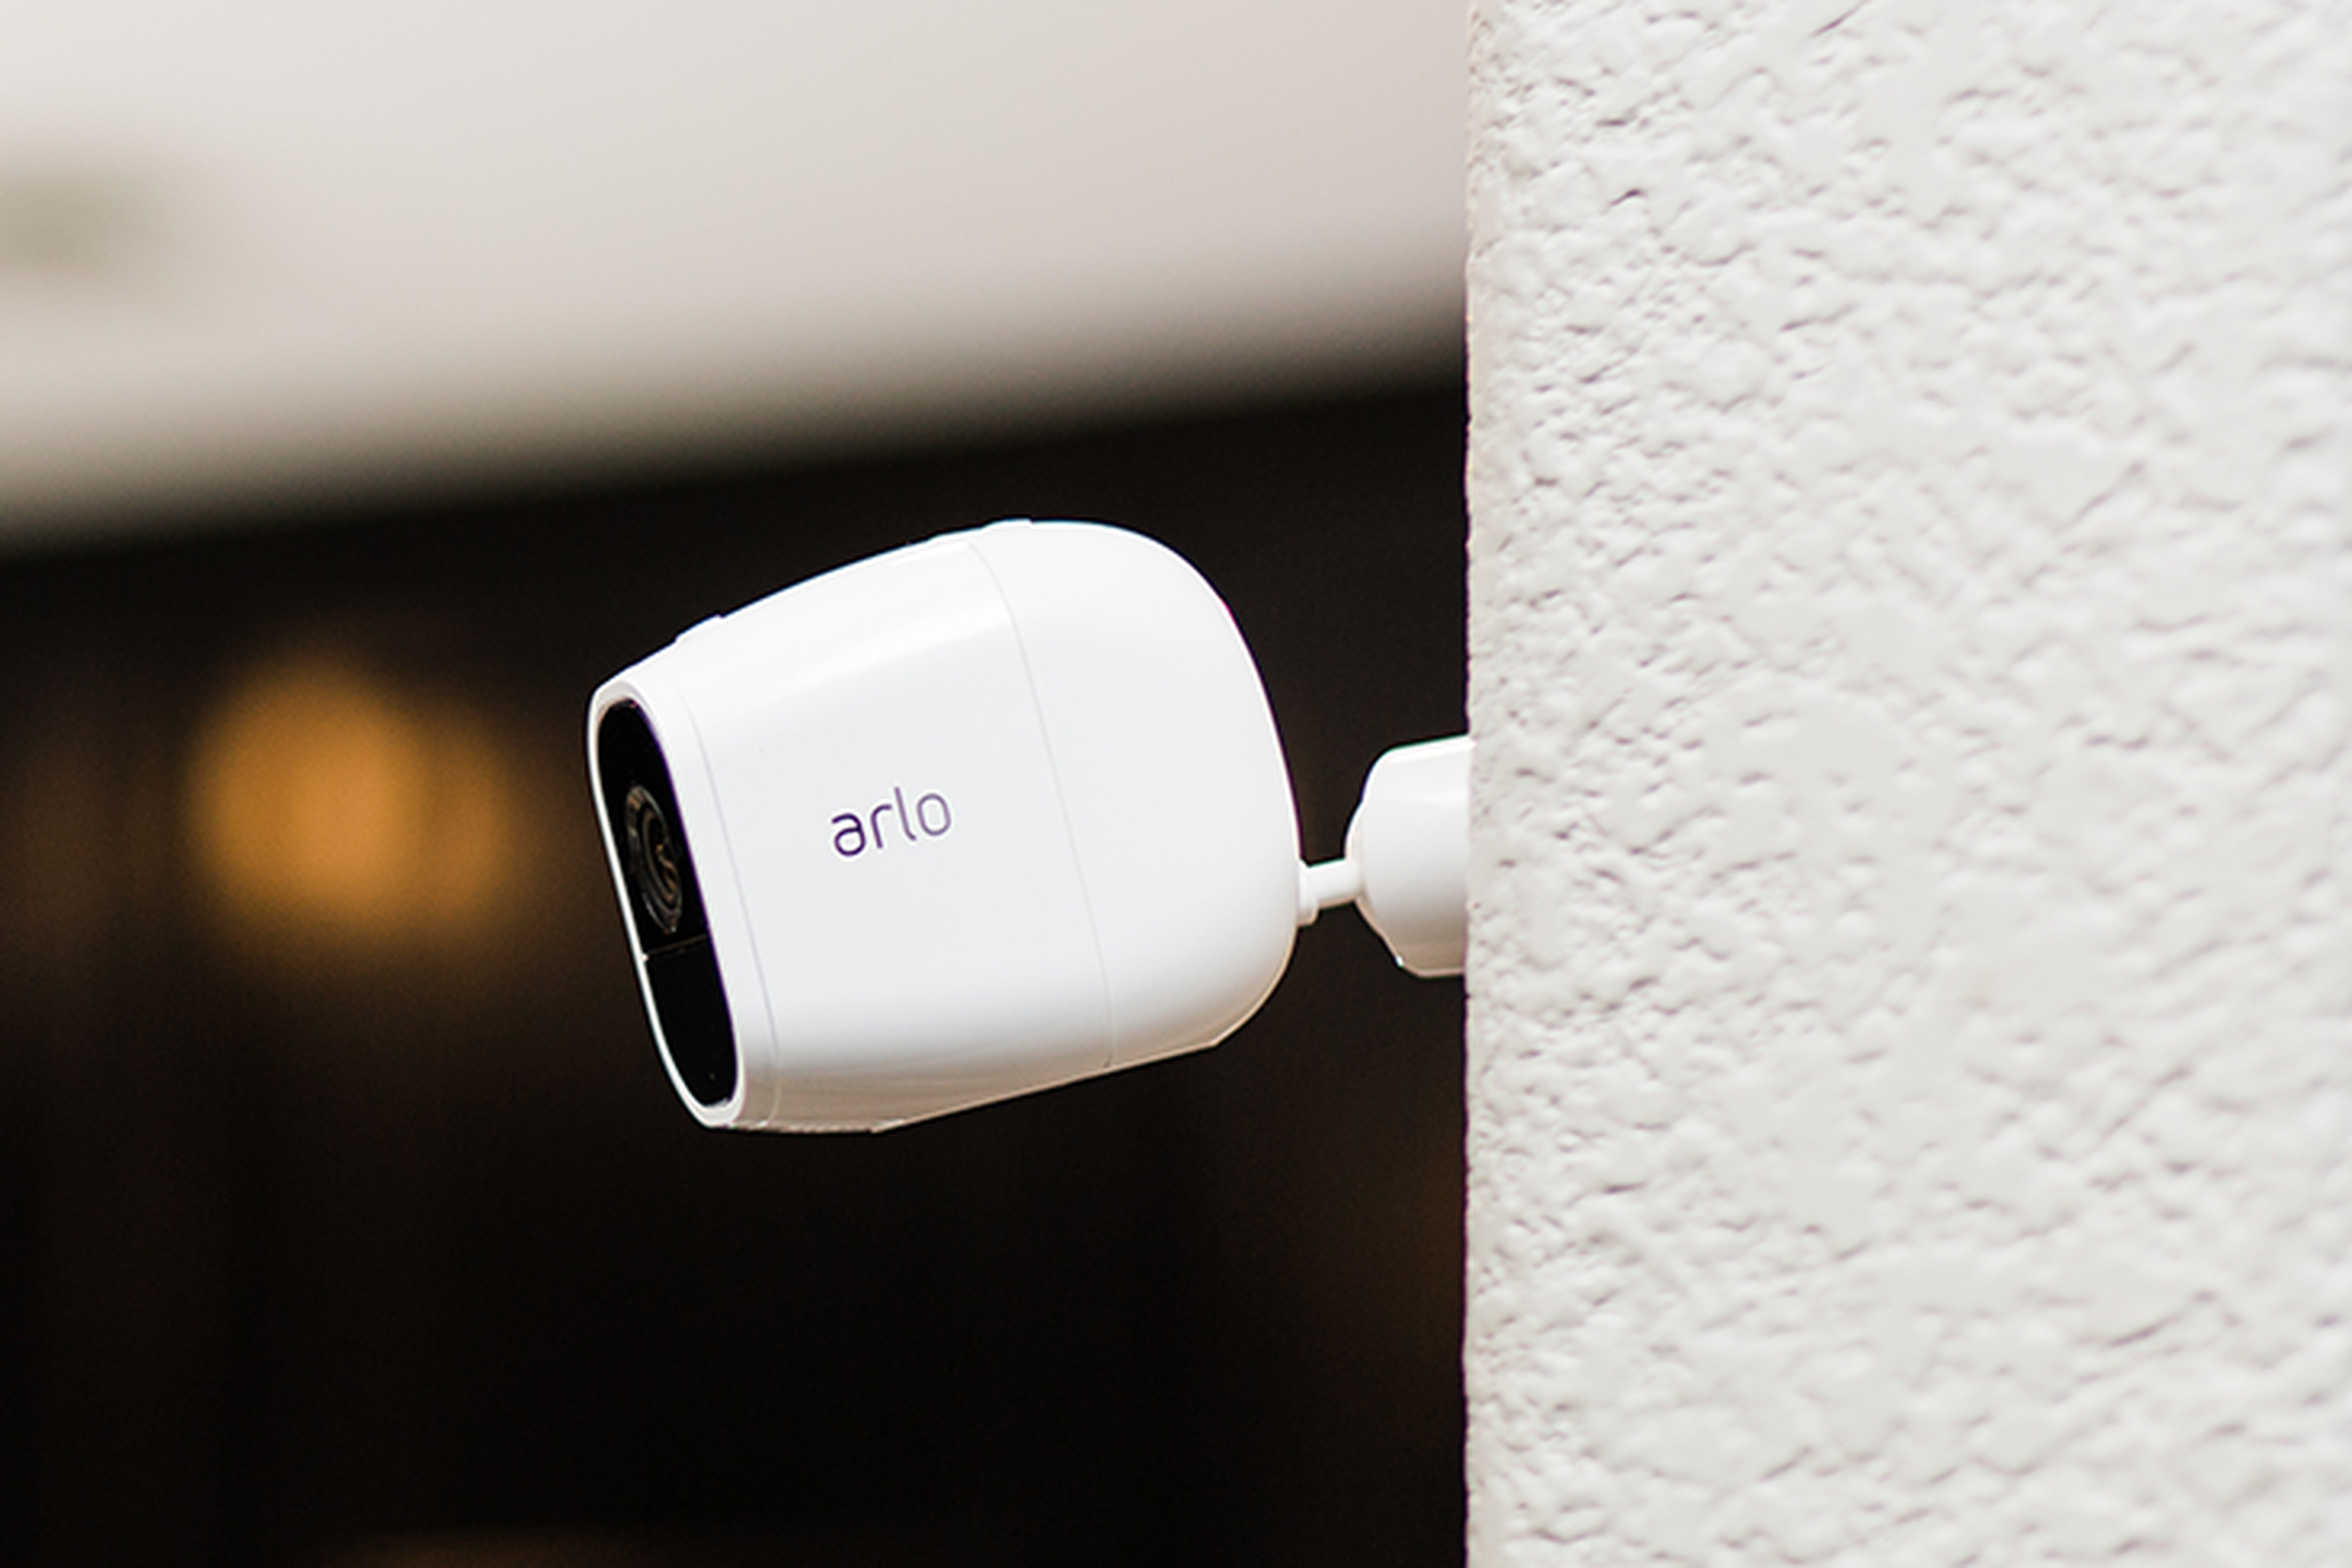 A close-up of the Arlo Pro 2 security camera